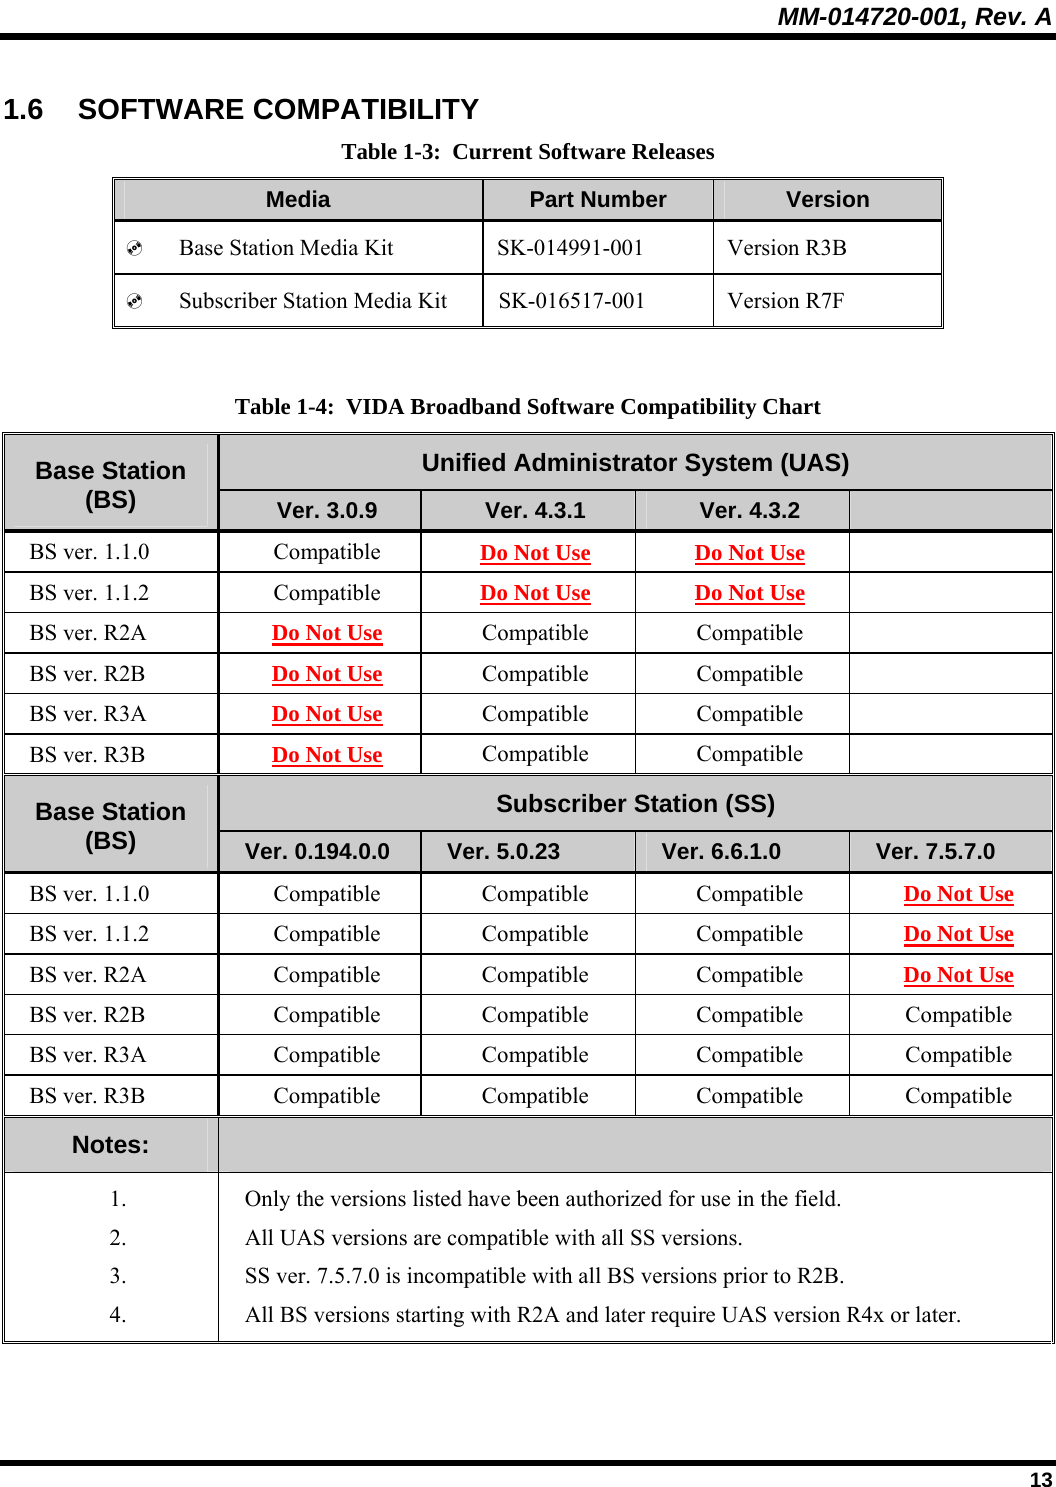 MM-014720-001, Rev. A  13 1.6 SOFTWARE COMPATIBILITY Table 1-3:  Current Software Releases Media   Part Number  Version    Base Station Media Kit  SK-014991-001  Version R3B    Subscriber Station Media Kit  SK-016517-001  Version R7F  Table 1-4:  VIDA Broadband Software Compatibility Chart Unified Administrator System (UAS) Base Station (BS)  Ver. 3.0.9  Ver. 4.3.1  Ver. 4.3.2   BS ver. 1.1.0  Compatible  Do Not Use  Do Not Use  BS ver. 1.1.2  Compatible  Do Not Use Do Not Use  BS ver. R2A  Do Not Use Compatible Compatible  BS ver. R2B  Do Not Use Compatible Compatible  BS ver. R3A  Do Not Use Compatible Compatible  BS ver. R3B  Do Not Use Compatible Compatible  Subscriber Station (SS) Base Station (BS)  Ver. 0.194.0.0  Ver. 5.0.23  Ver. 6.6.1.0  Ver. 7.5.7.0 BS ver. 1.1.0  Compatible  Compatible  Compatible  Do Not Use BS ver. 1.1.2  Compatible  Compatible  Compatible  Do Not Use BS ver. R2A  Compatible  Compatible  Compatible  Do Not Use BS ver. R2B  Compatible  Compatible  Compatible  Compatible BS ver. R3A  Compatible  Compatible  Compatible  Compatible BS ver. R3B  Compatible  Compatible  Compatible  Compatible Notes:   1.  Only the versions listed have been authorized for use in the field. 2.  All UAS versions are compatible with all SS versions. 3.  SS ver. 7.5.7.0 is incompatible with all BS versions prior to R2B. 4.  All BS versions starting with R2A and later require UAS version R4x or later.  